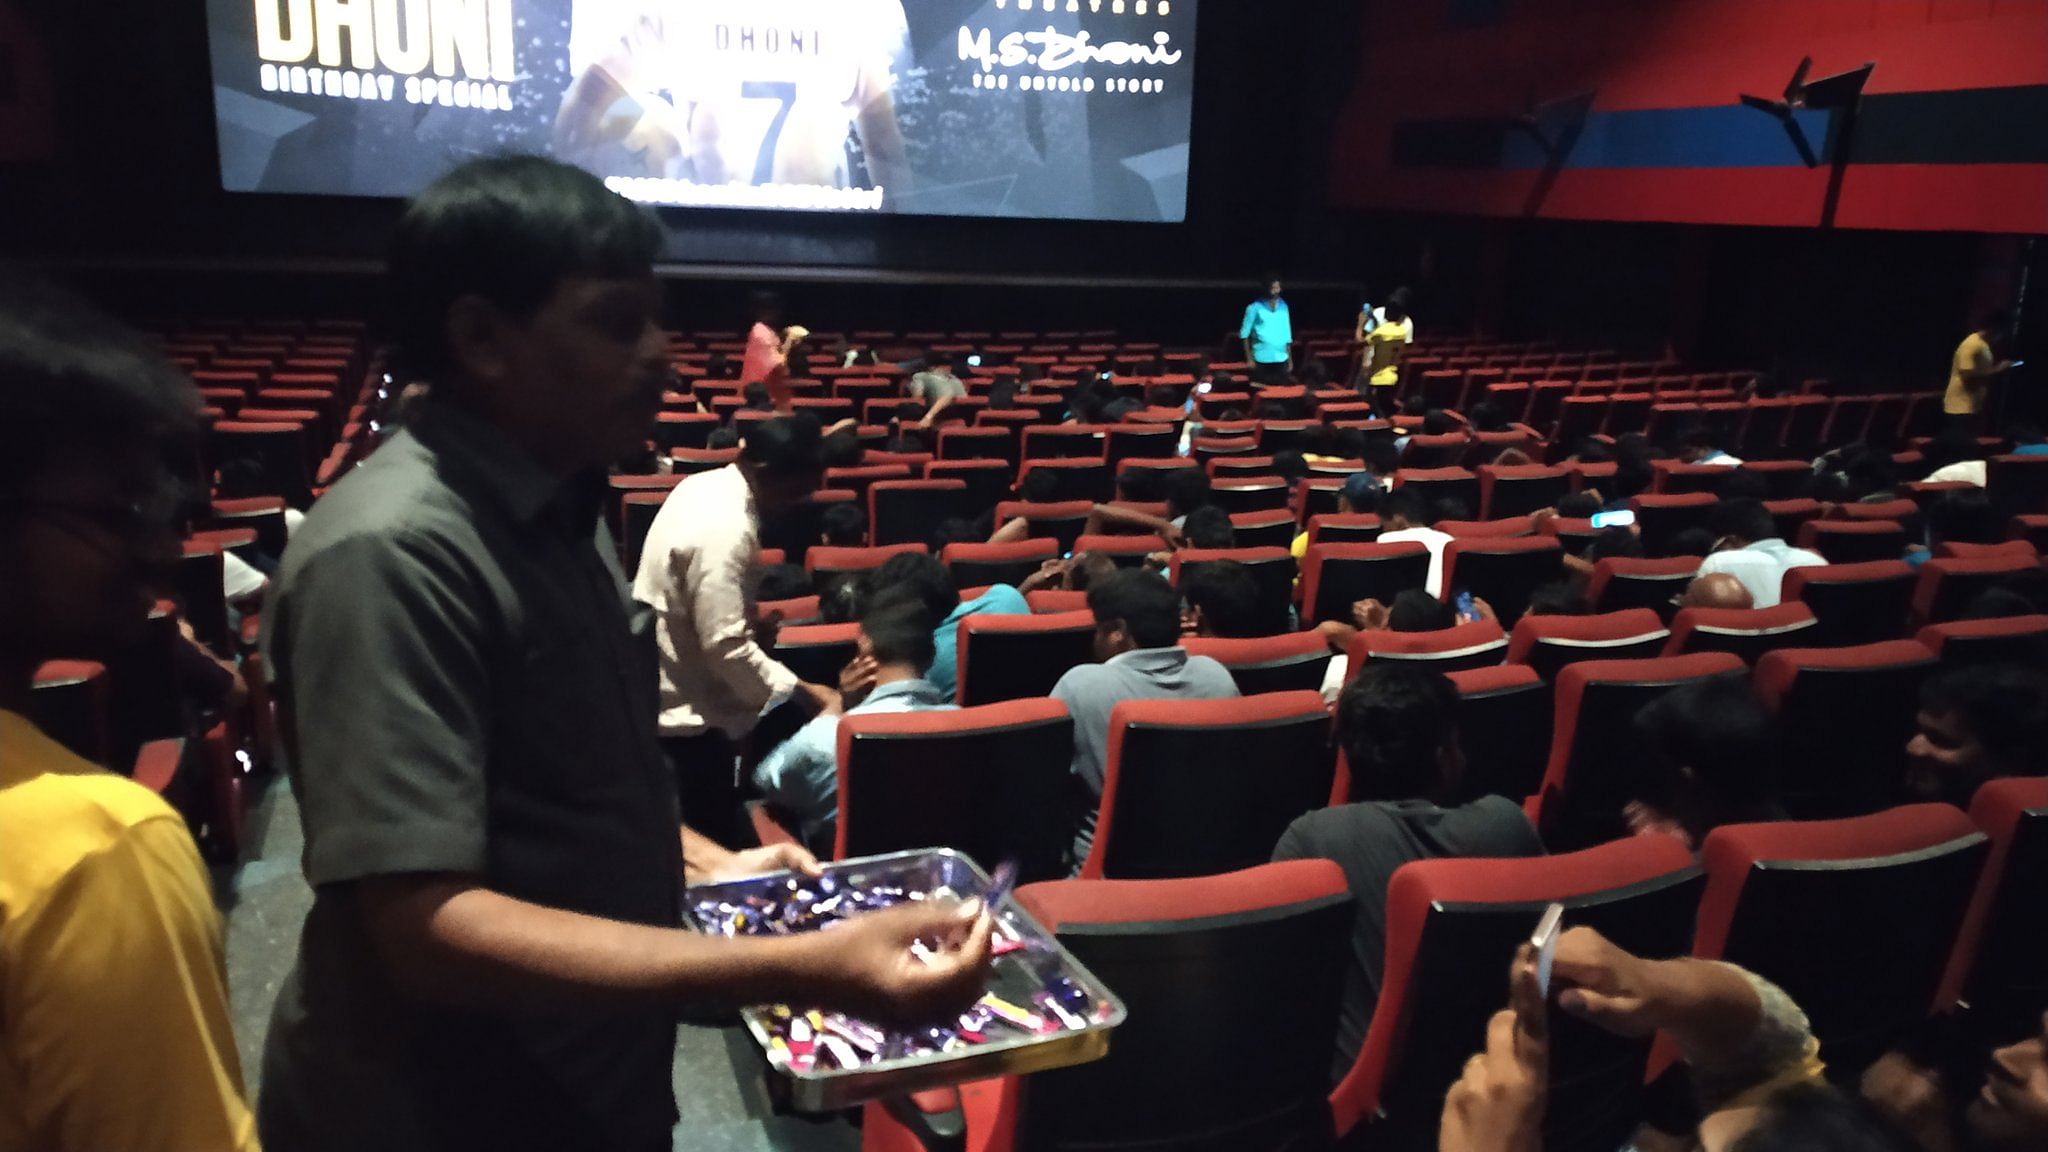 Fans distributing chocolates during the screening of MS Dhoni biopic. (Image courtesy Twitter)